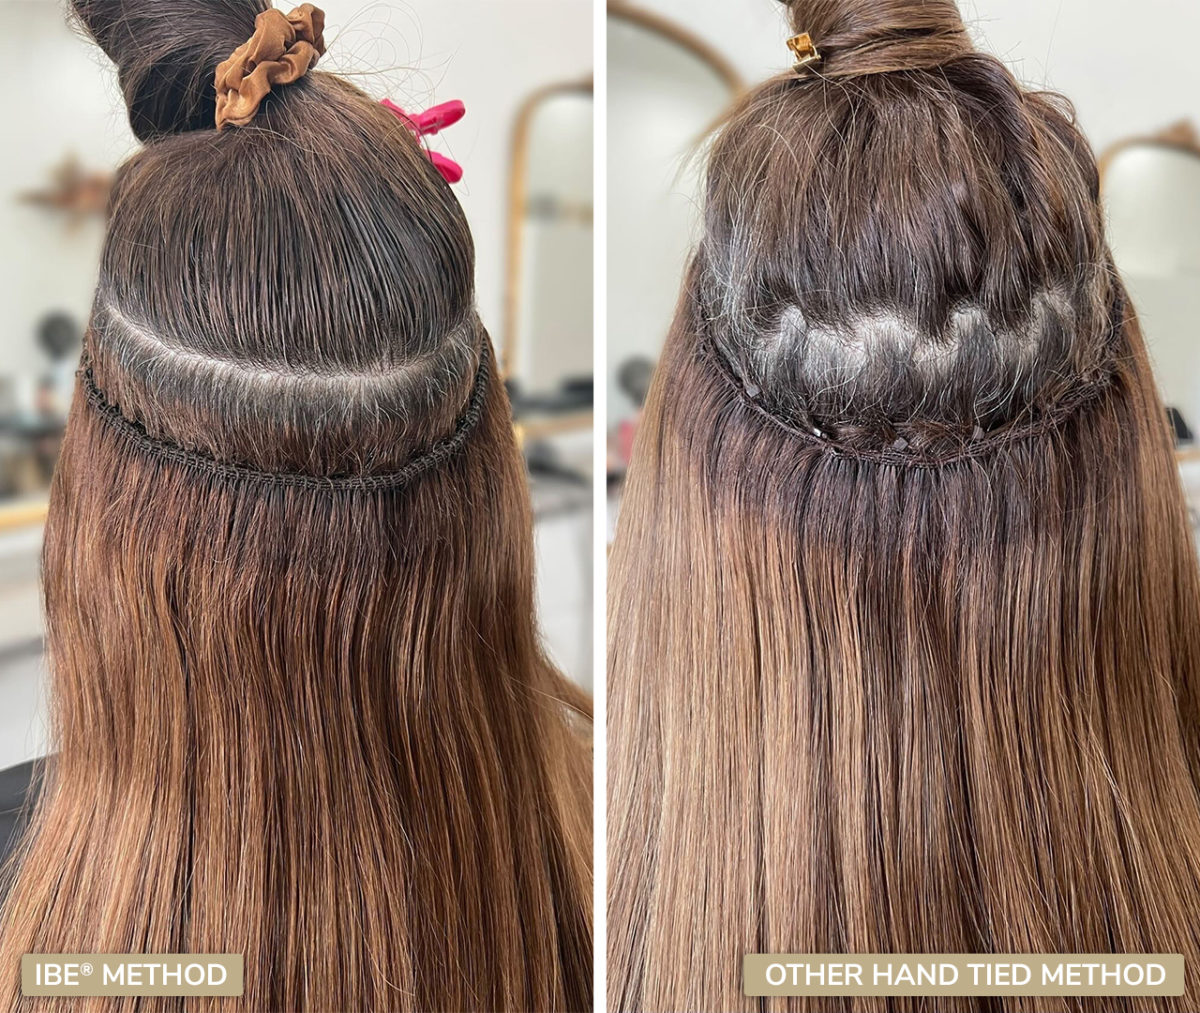 How long do hand tied extensions last?